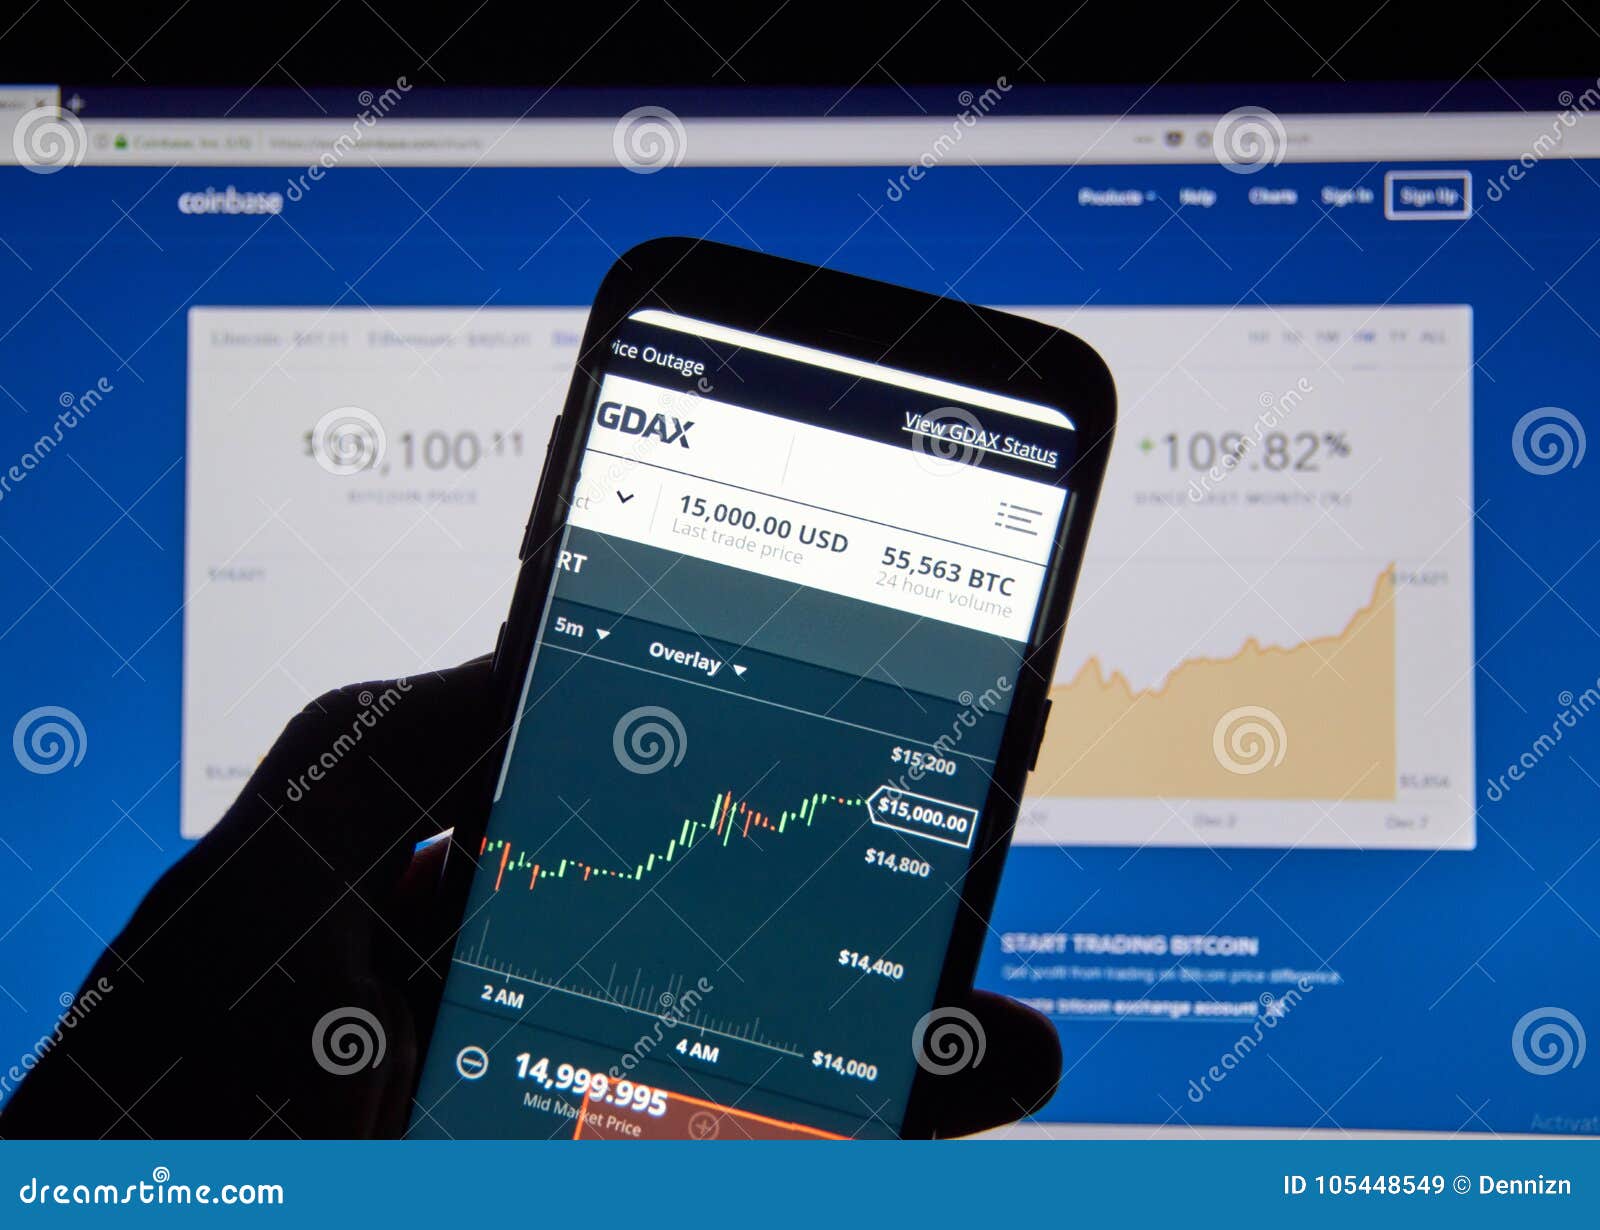 Bitcoin USD Price On Coinbase Android Application GDAX ...